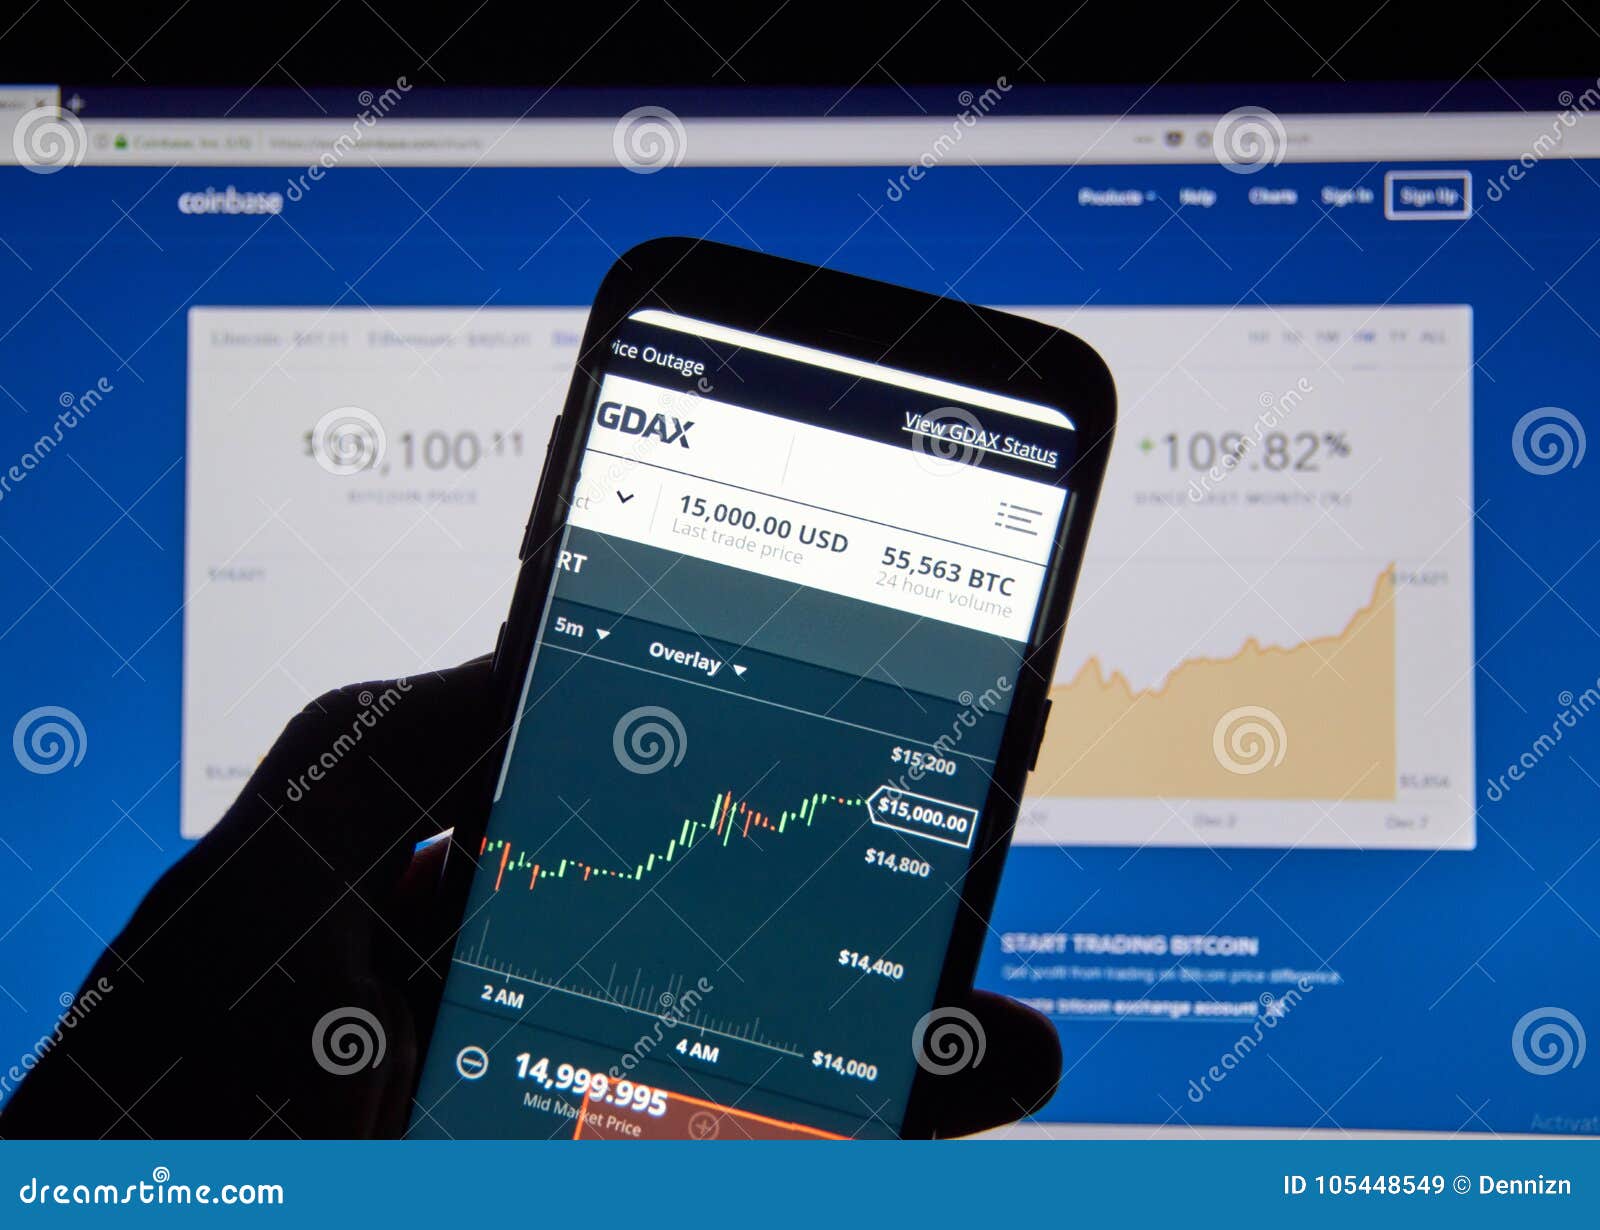 Bitcoin USD Price On Coinbase Android Application GDAX ...